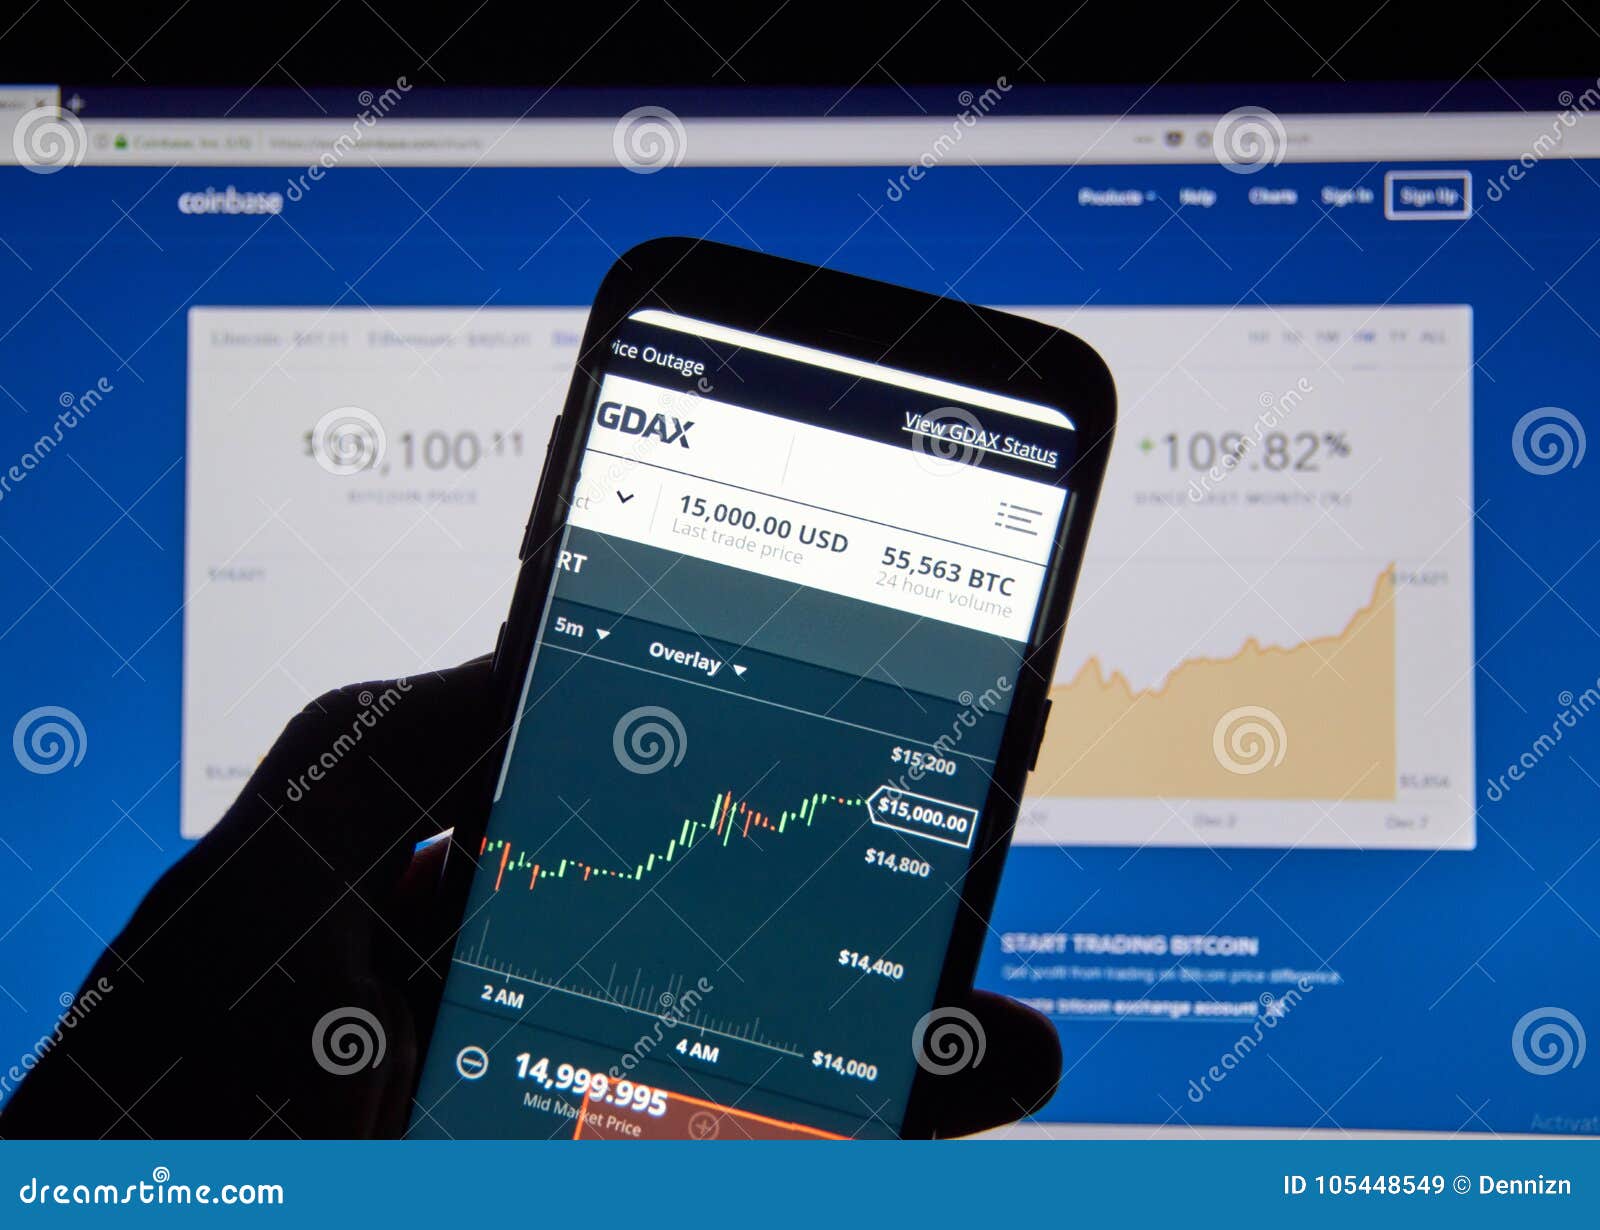 Bitcoin USD Price On Coinbase Android Application GDAX ...